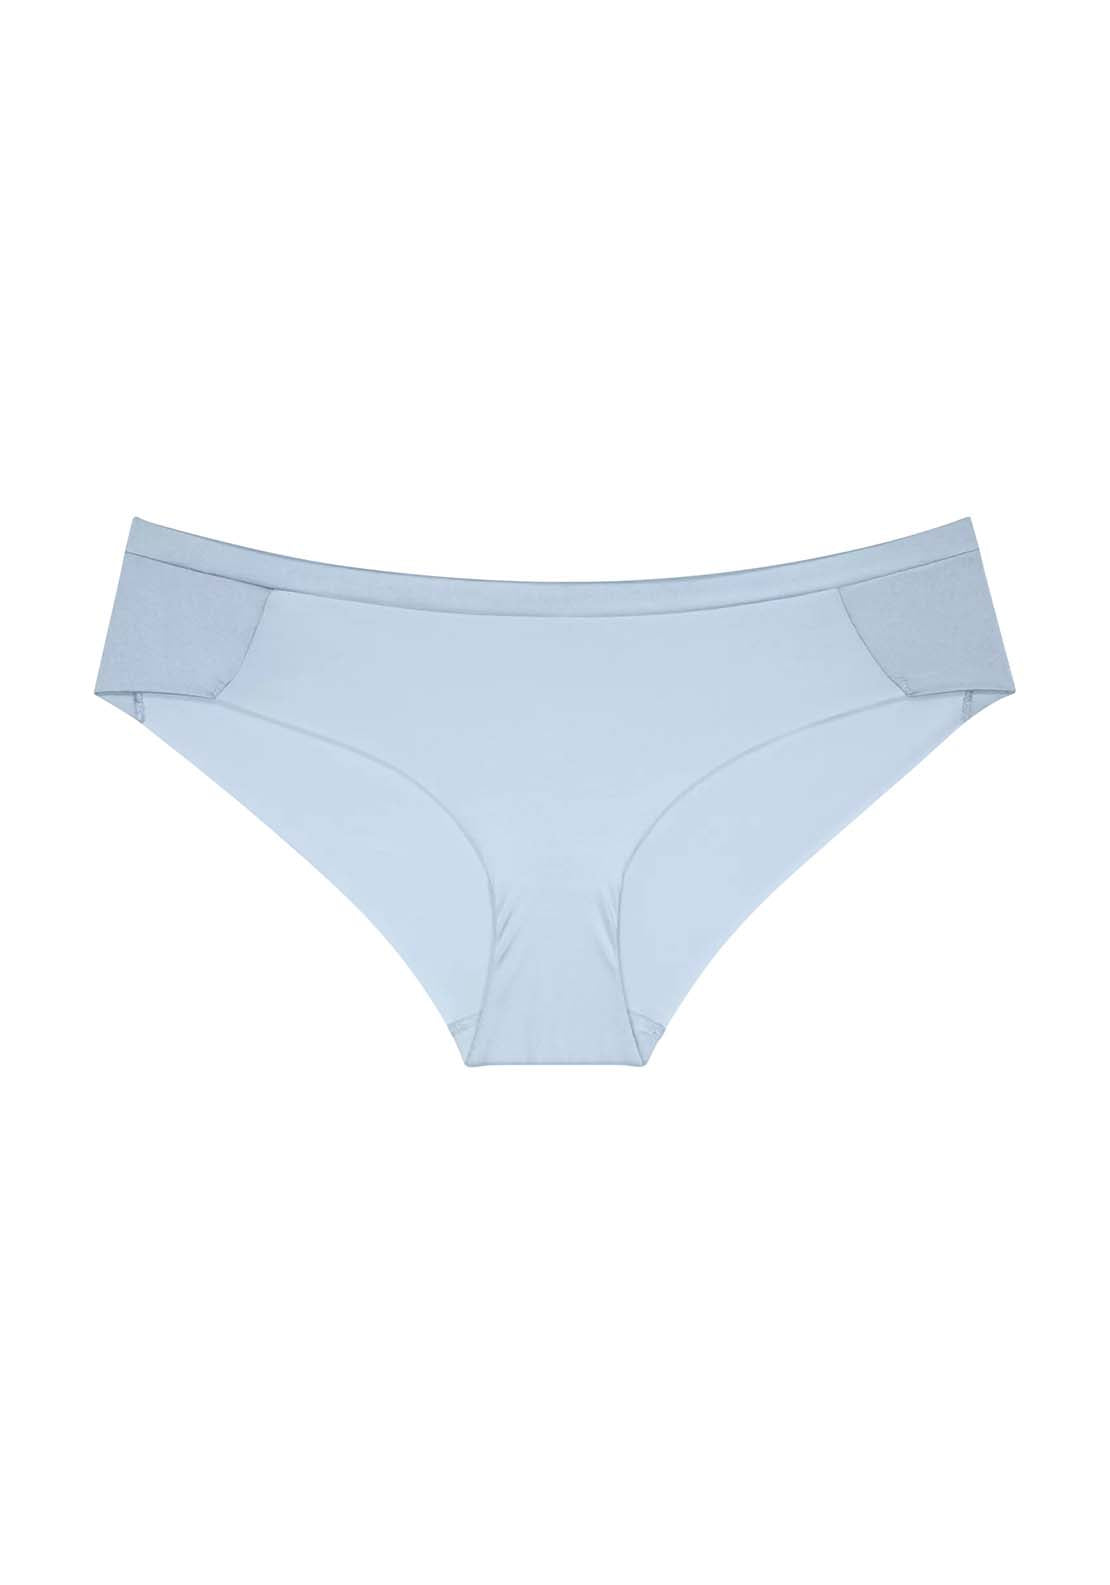 Triumph Body Make-up Soft Touch Hipster brief 1 Shaws Department Stores